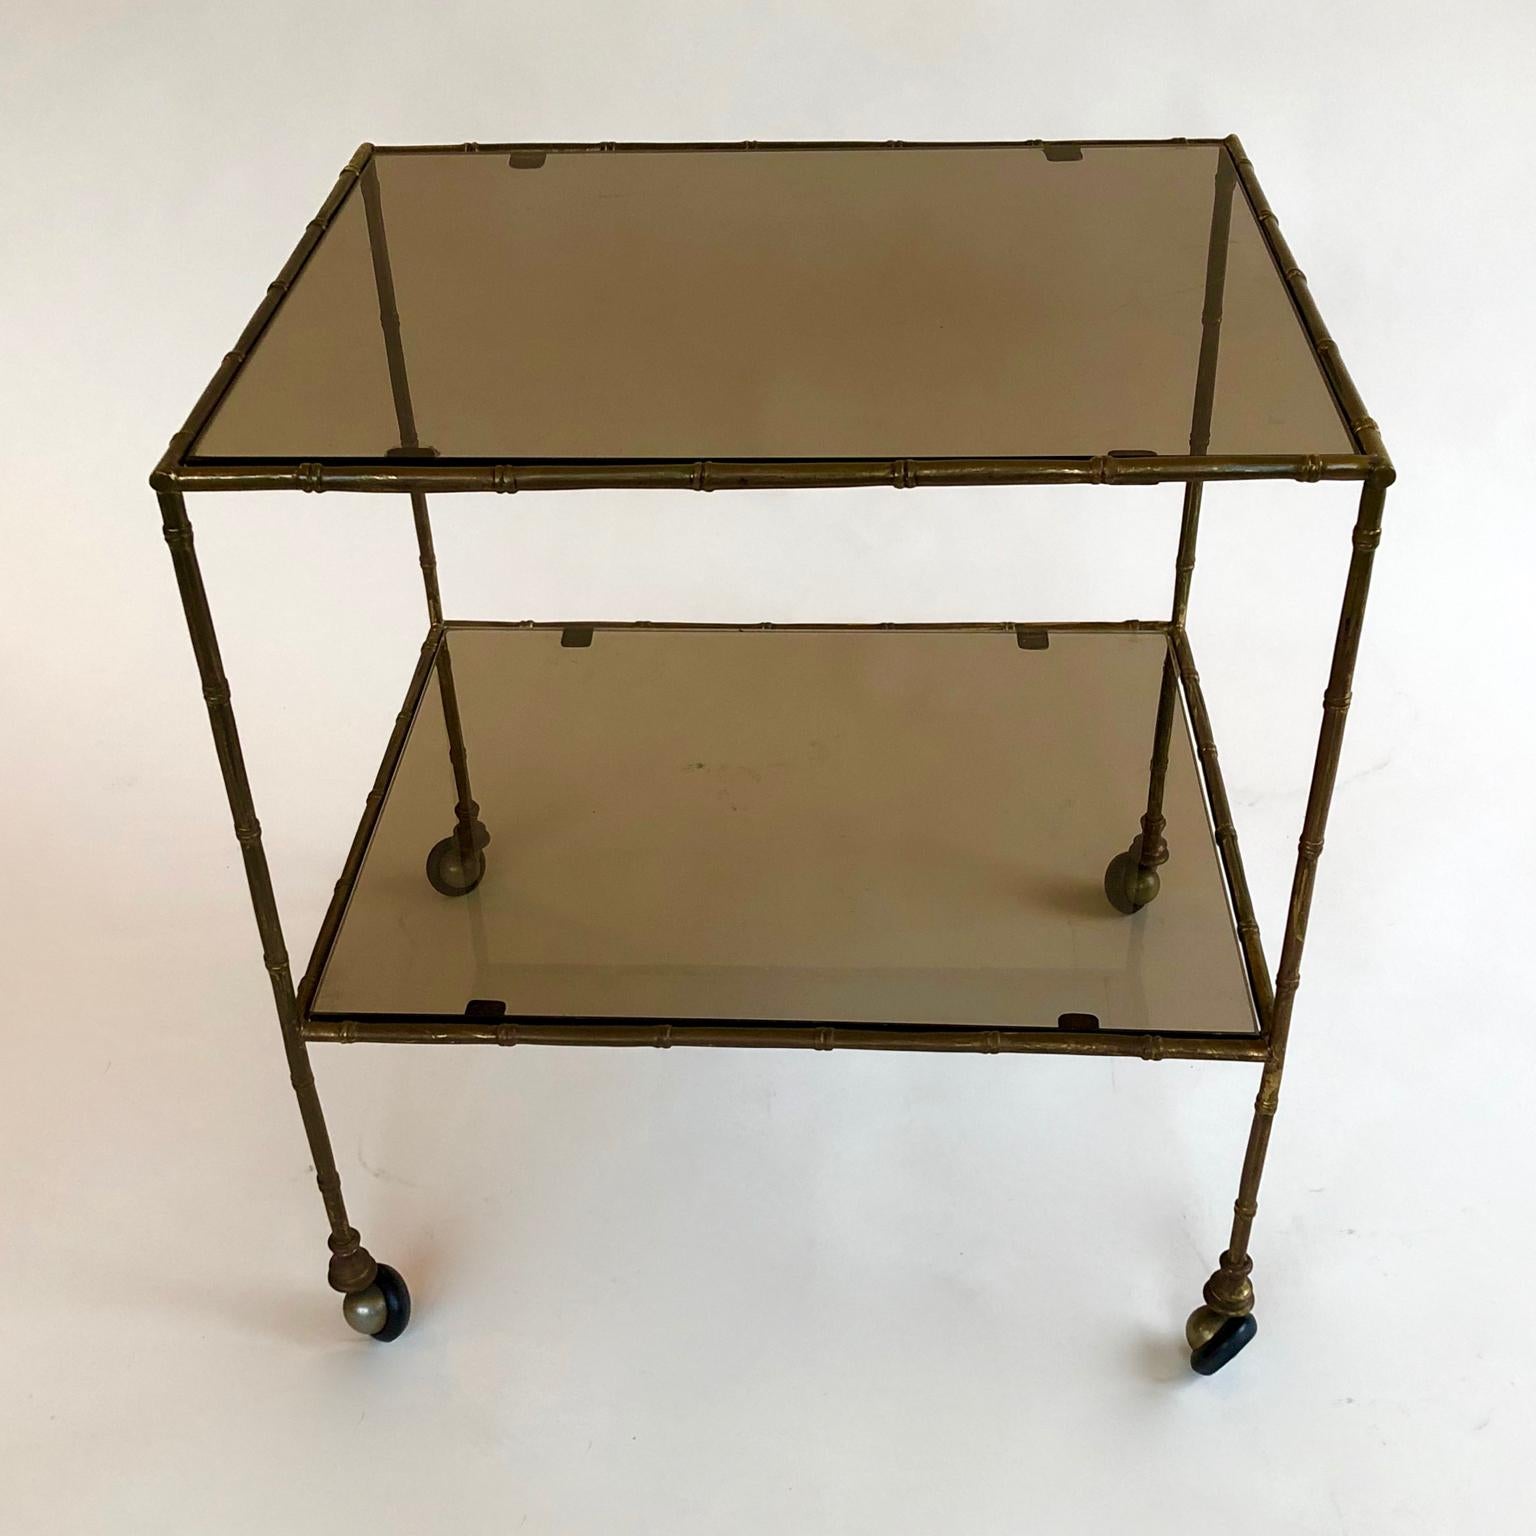 A stylish 1970s French brass faux bamboo and smoked glass 2-tier accent, side or end table, drinks trolley or cart. Possibly by Baguès. Untouched, unpolished. on wheels.